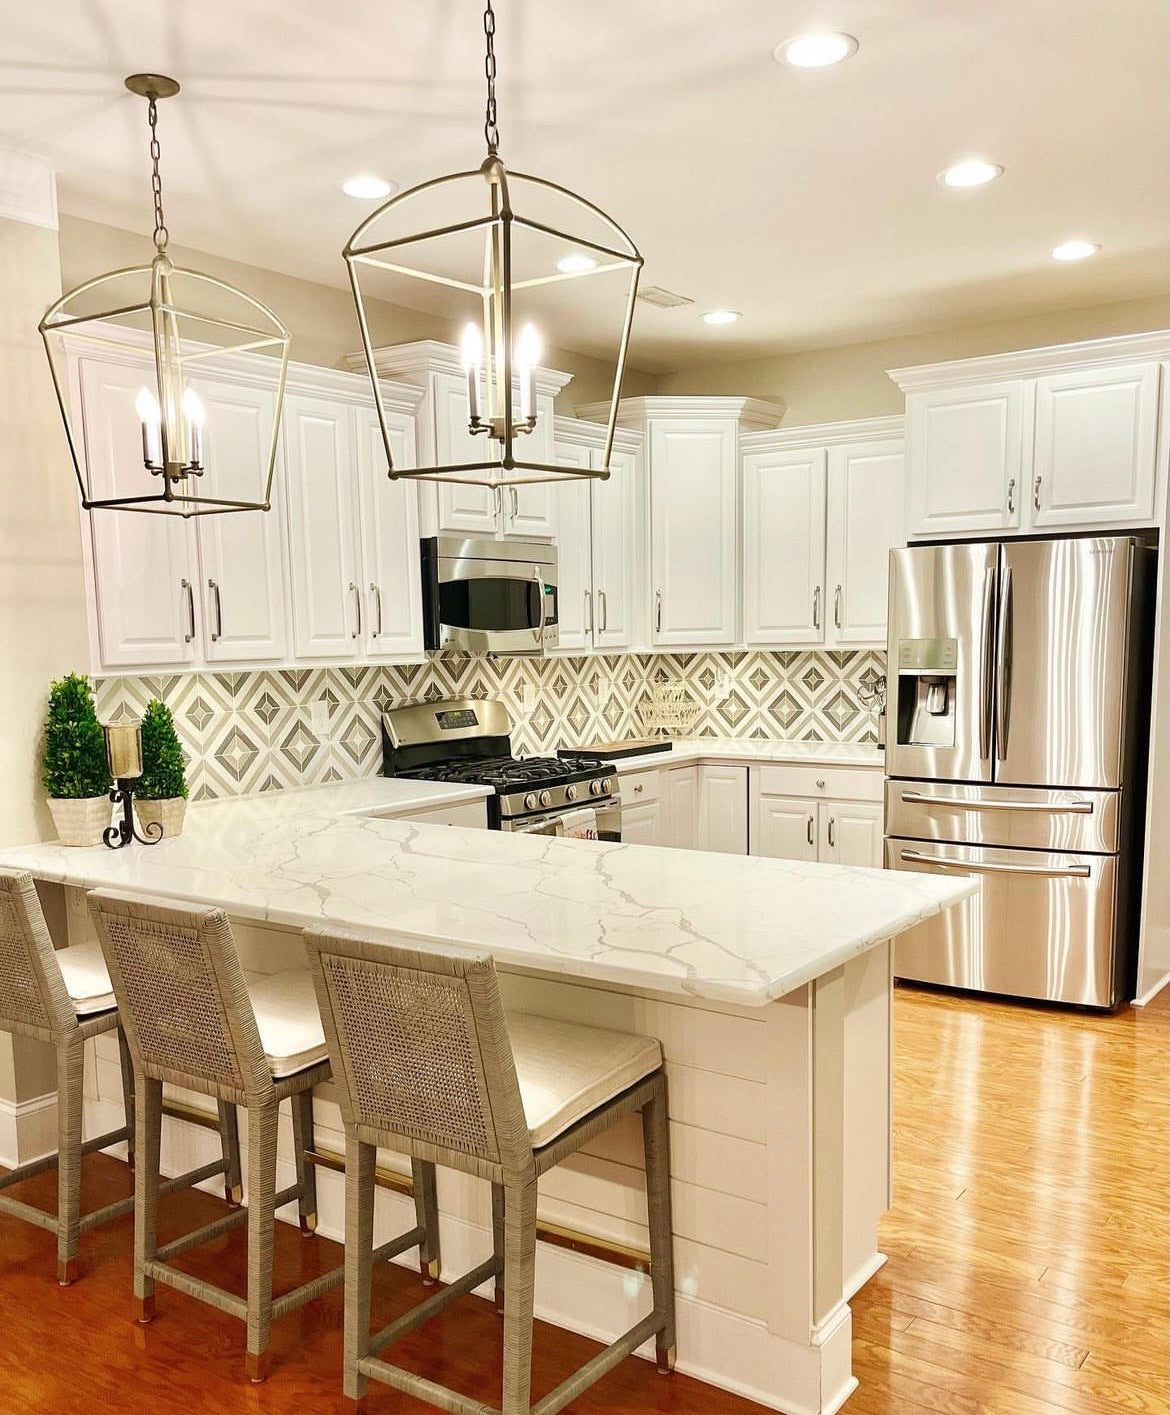 Photo showcasing a completed kitchen remodeling project by Lori Savio